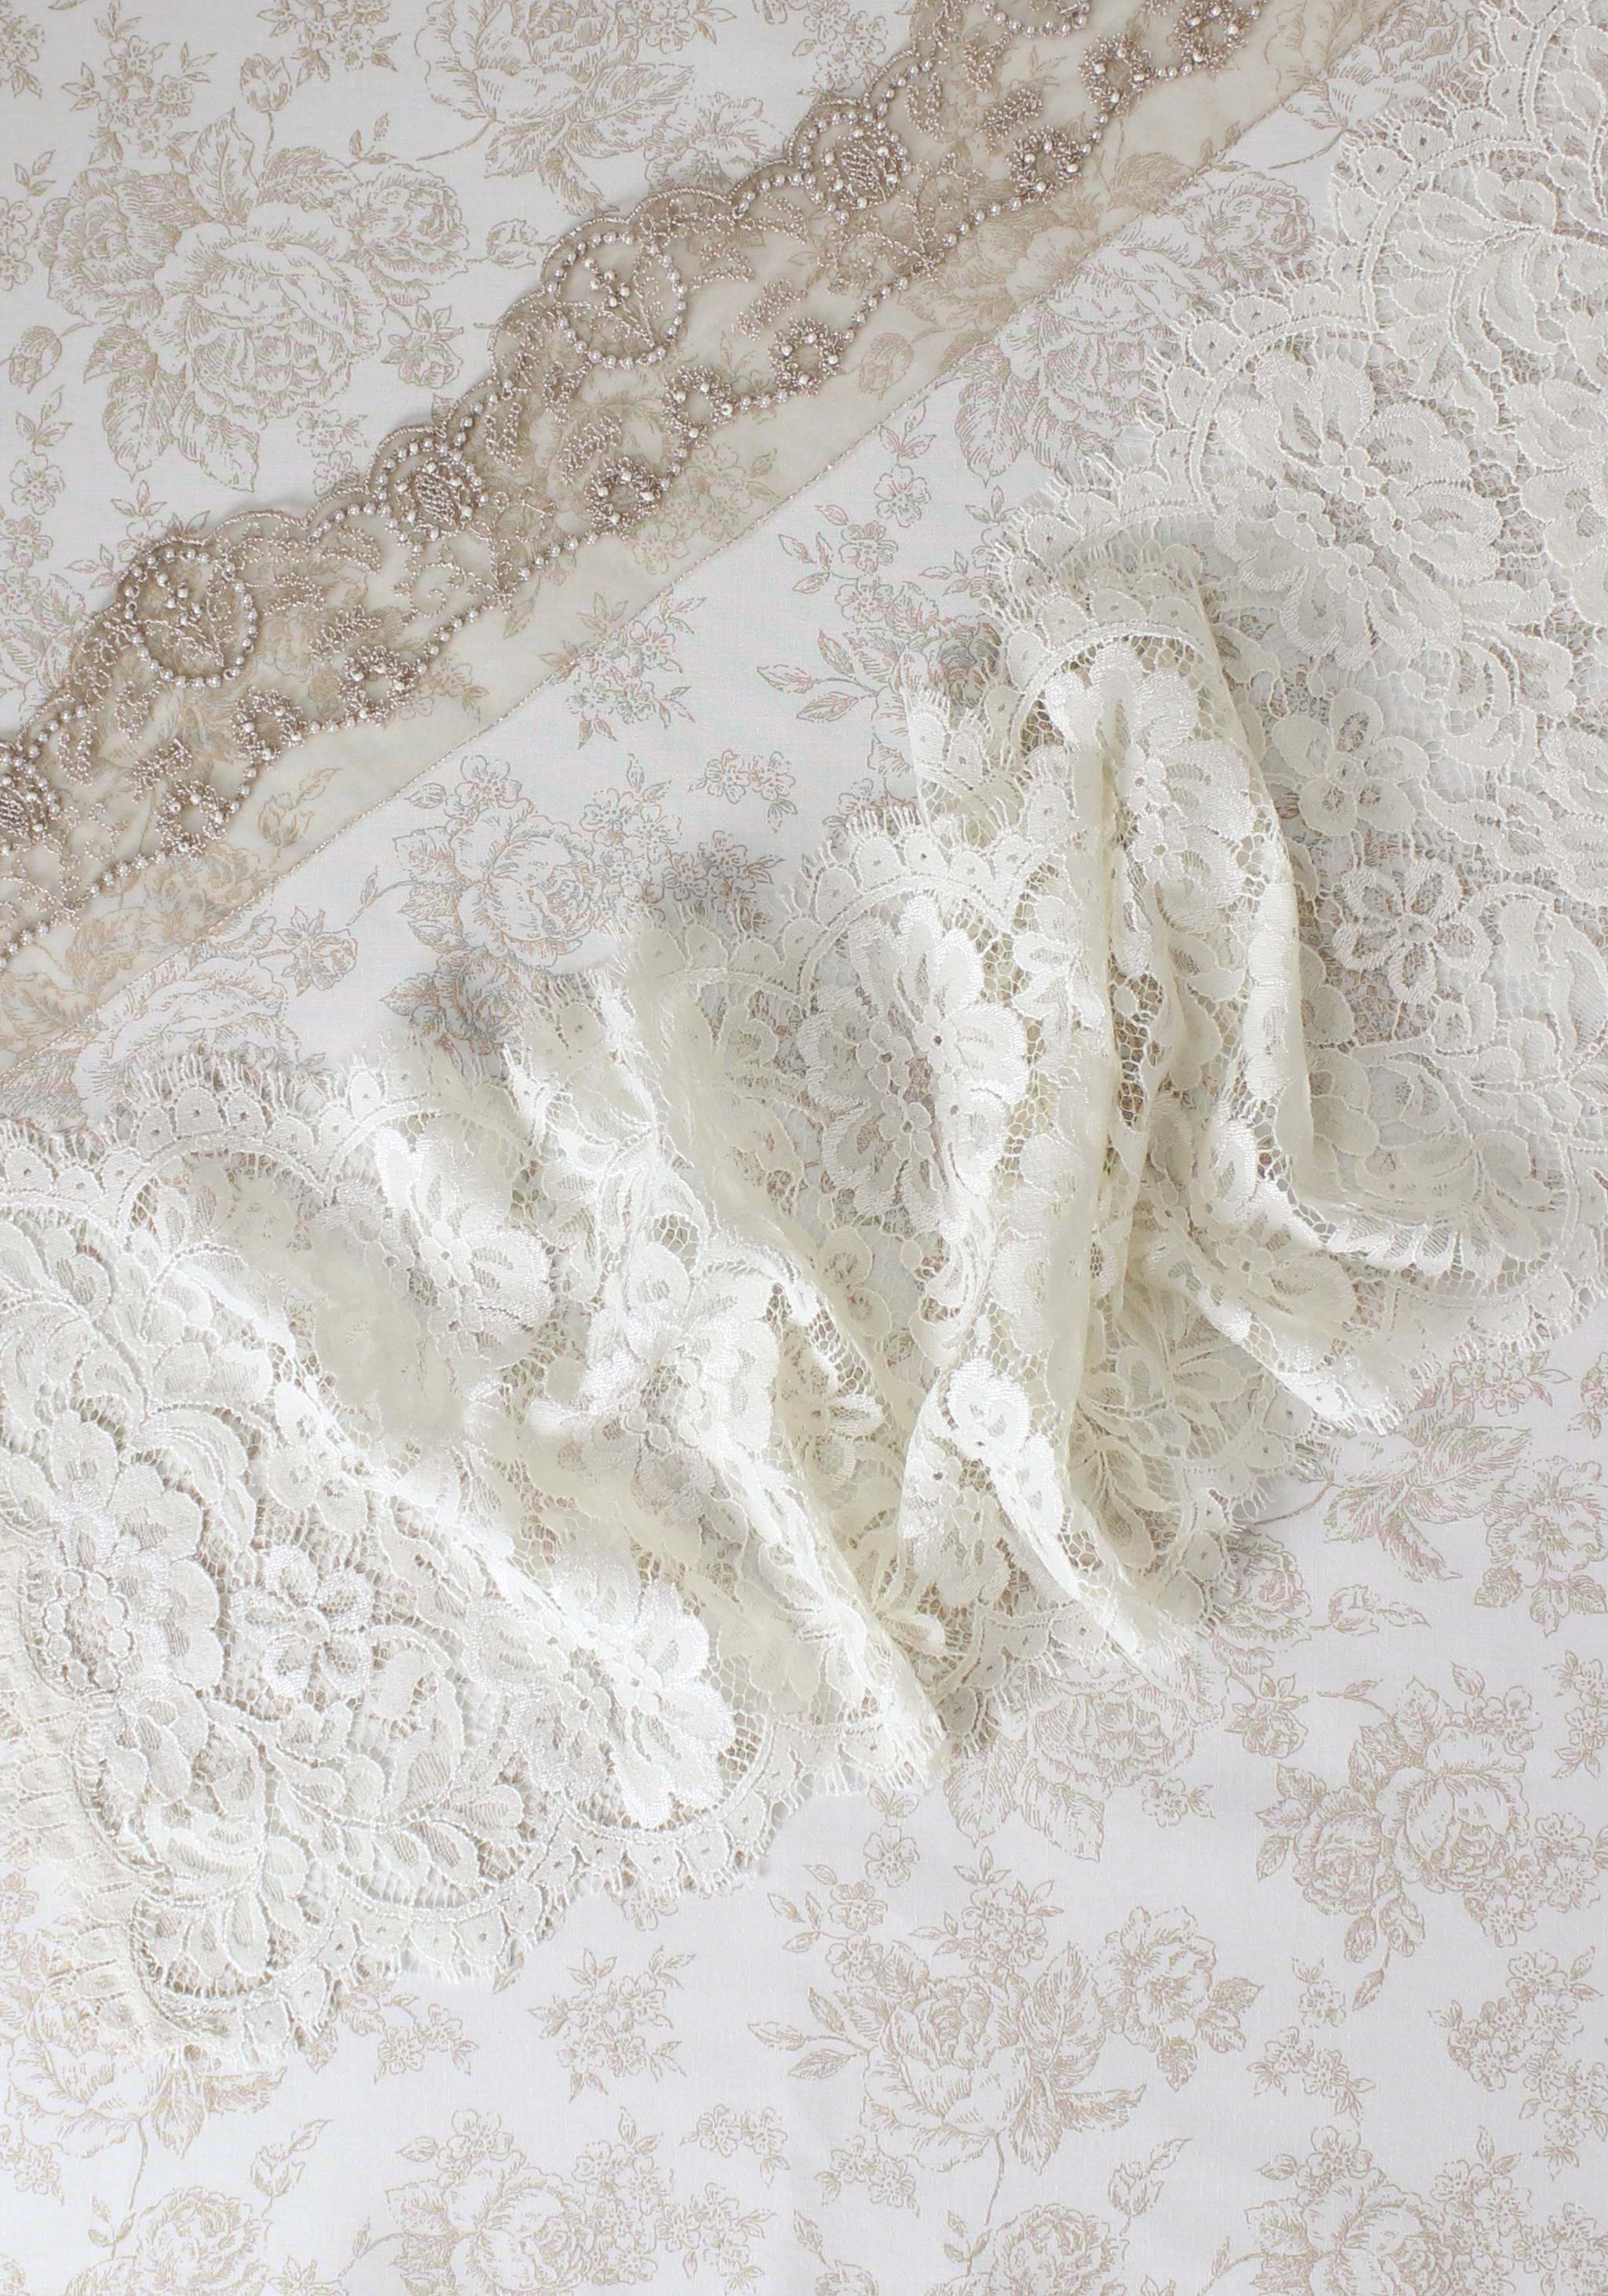 Cotton Fabric Retro Eyelet Flower Cotton Lace Fabric in off White